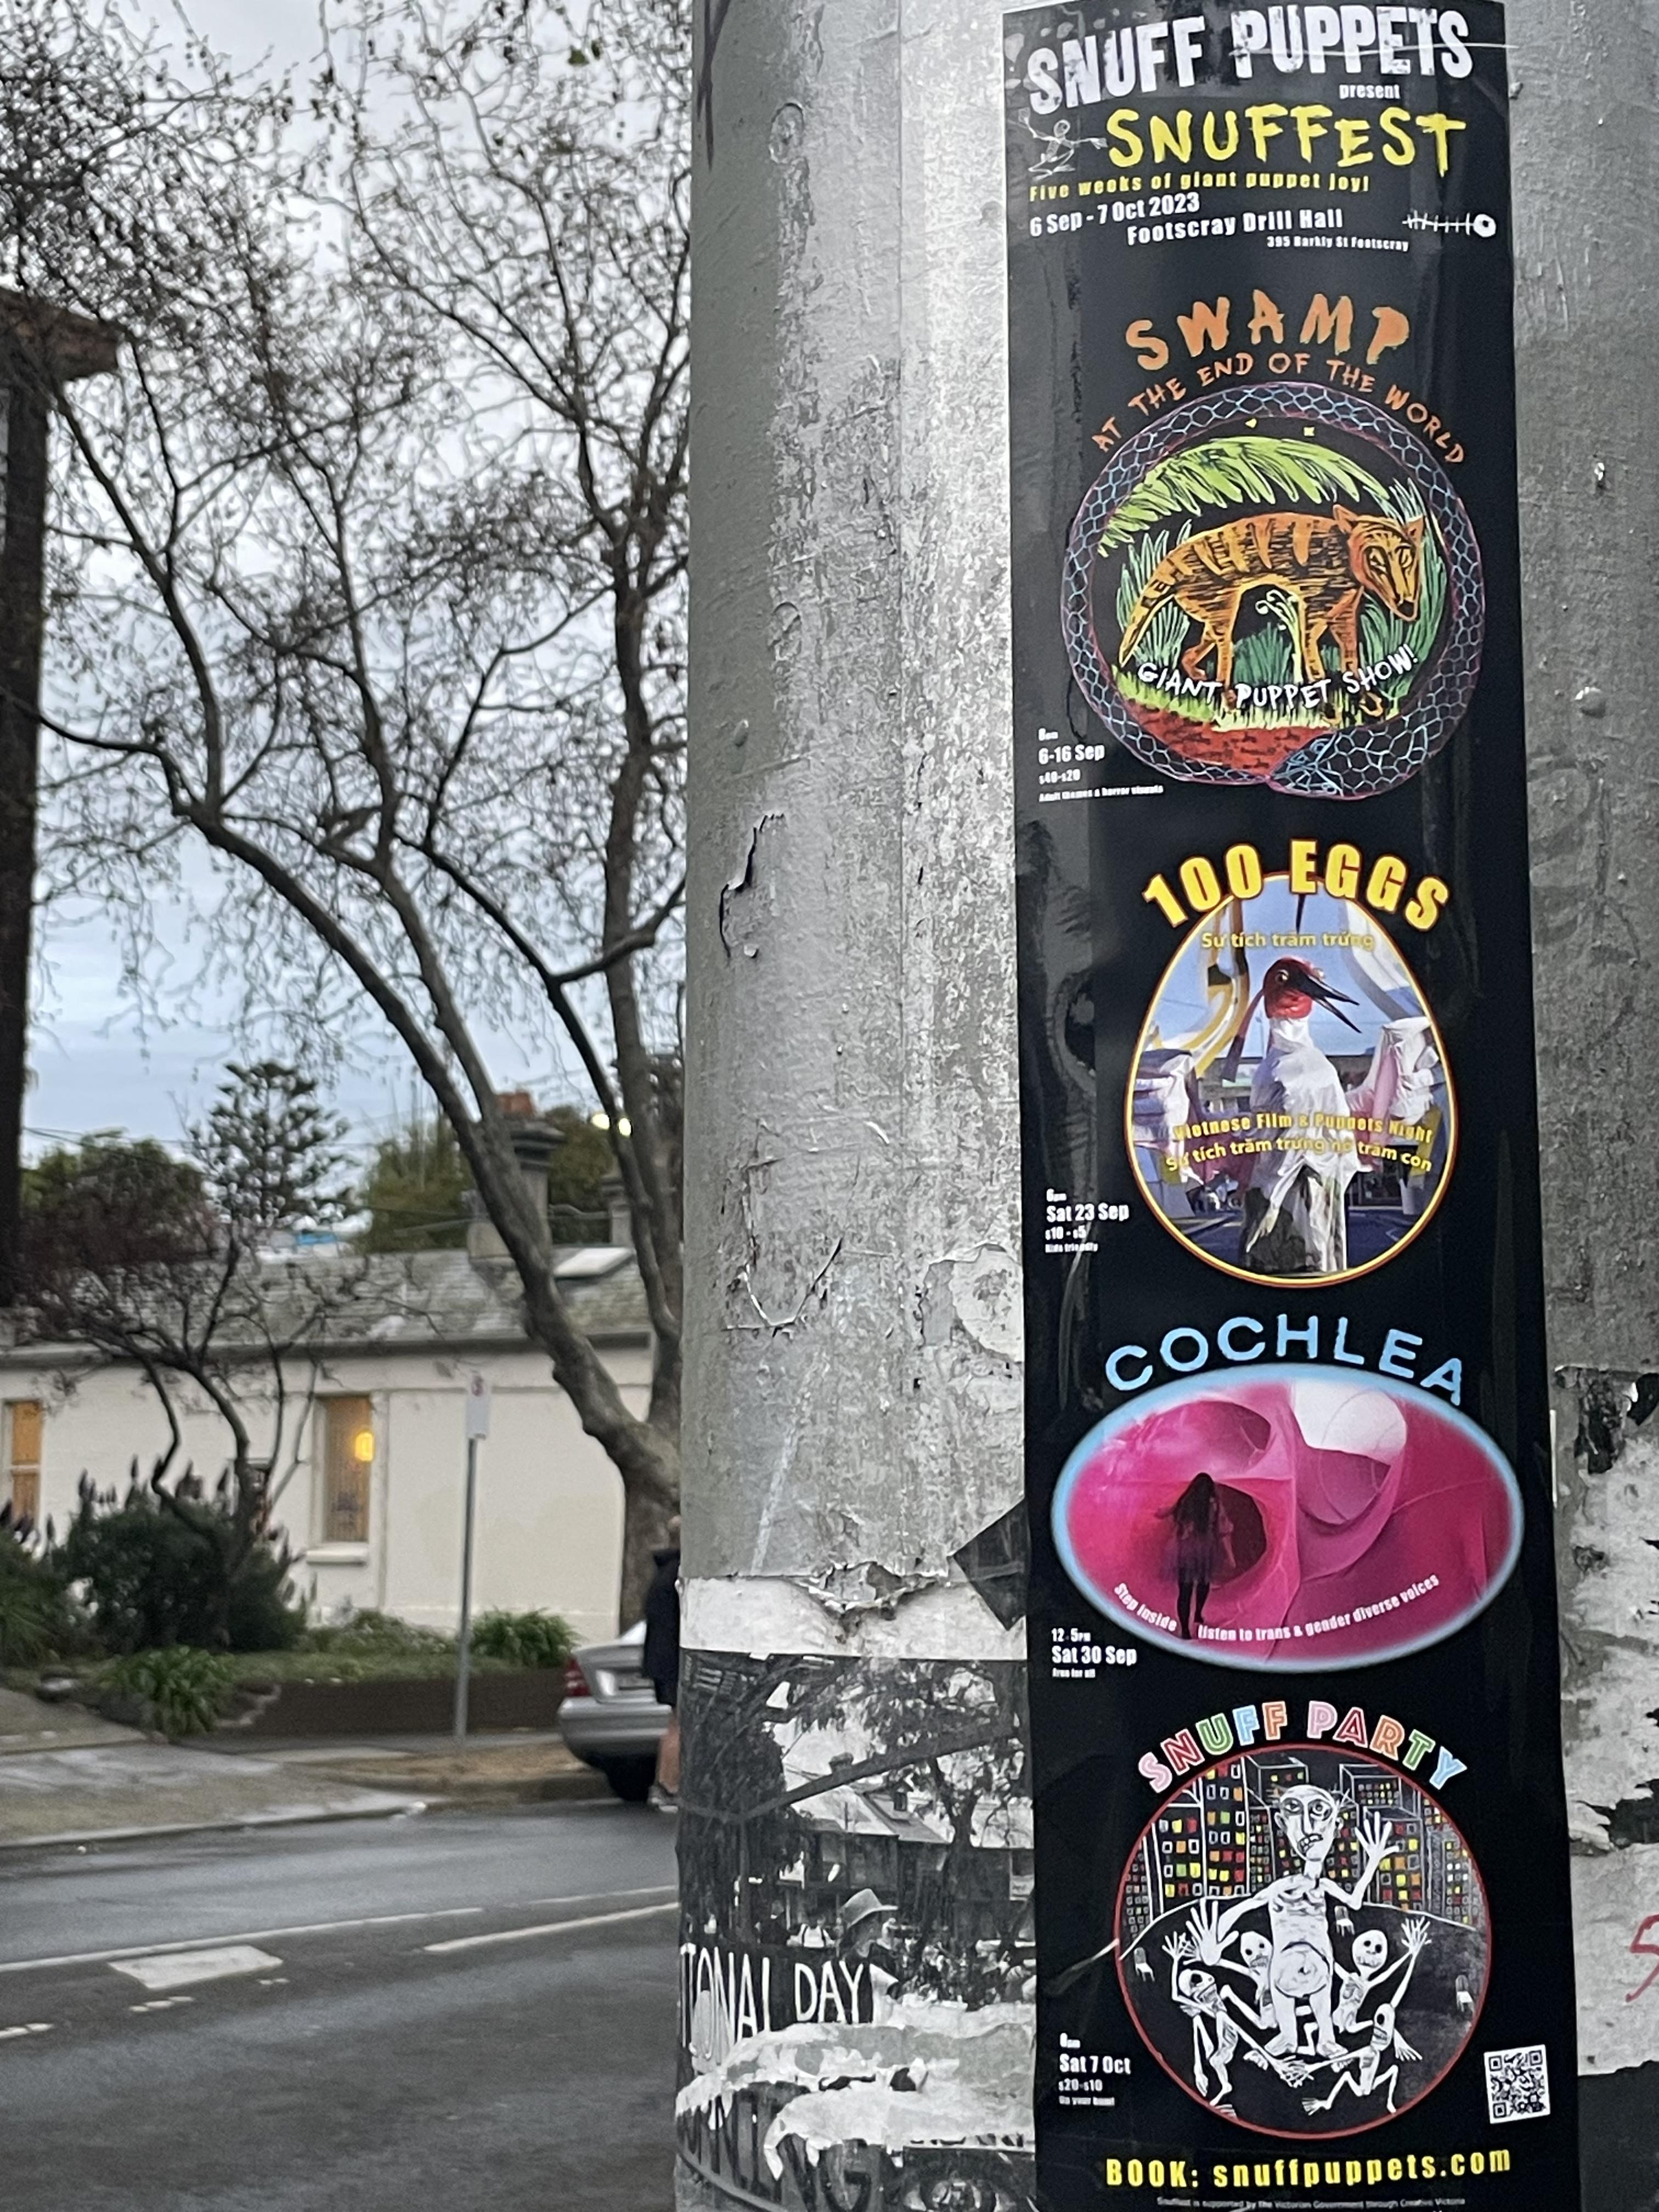 Snuffest poster in Footscray. Image: Phuong